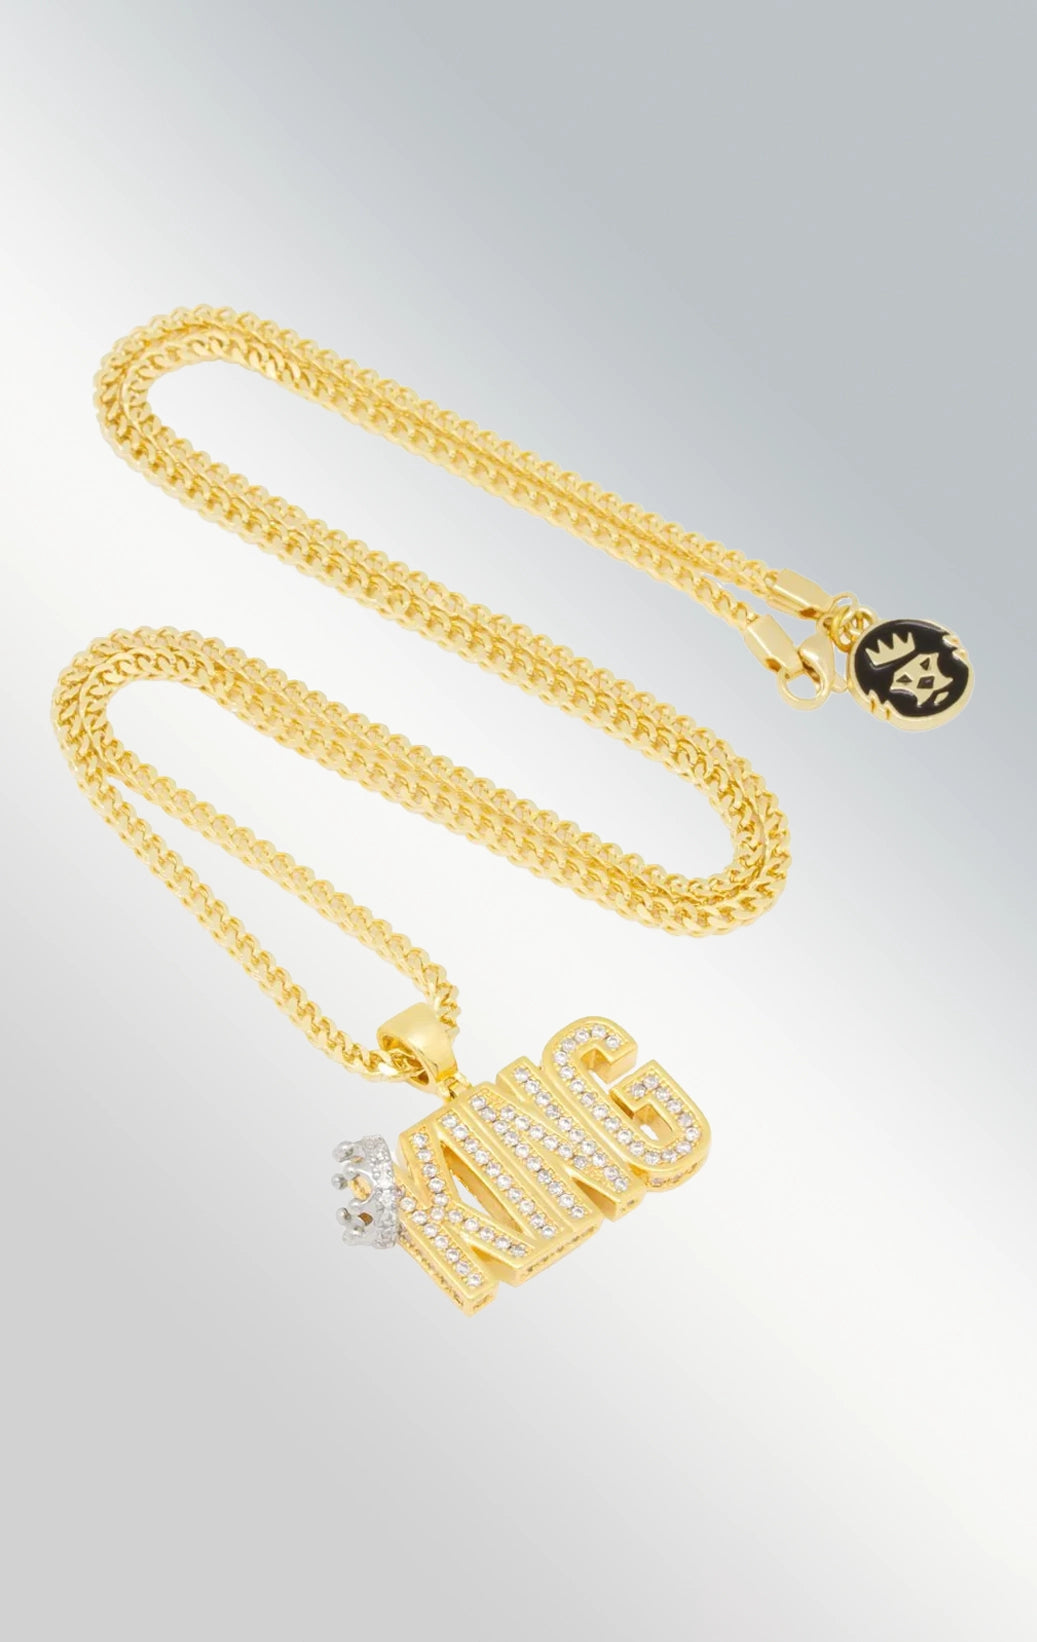 King gold necklace